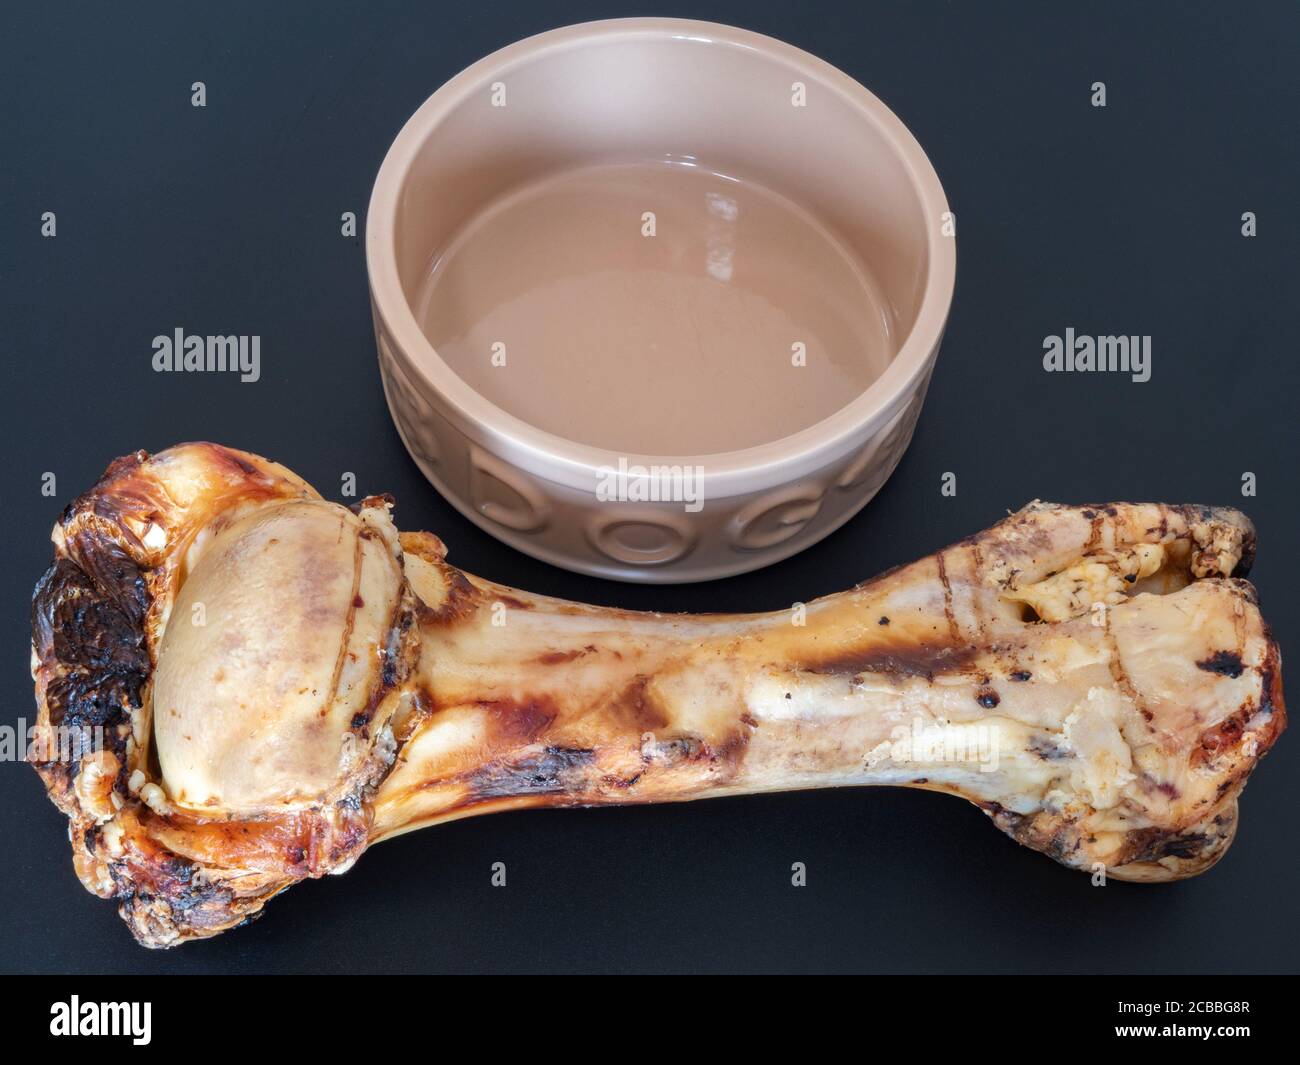 Closeup isolated shot of a giant roasted beef leg bone in front of a small dog bowl – sold as a natural meaty treat for a pet dog to chew on. Stock Photo